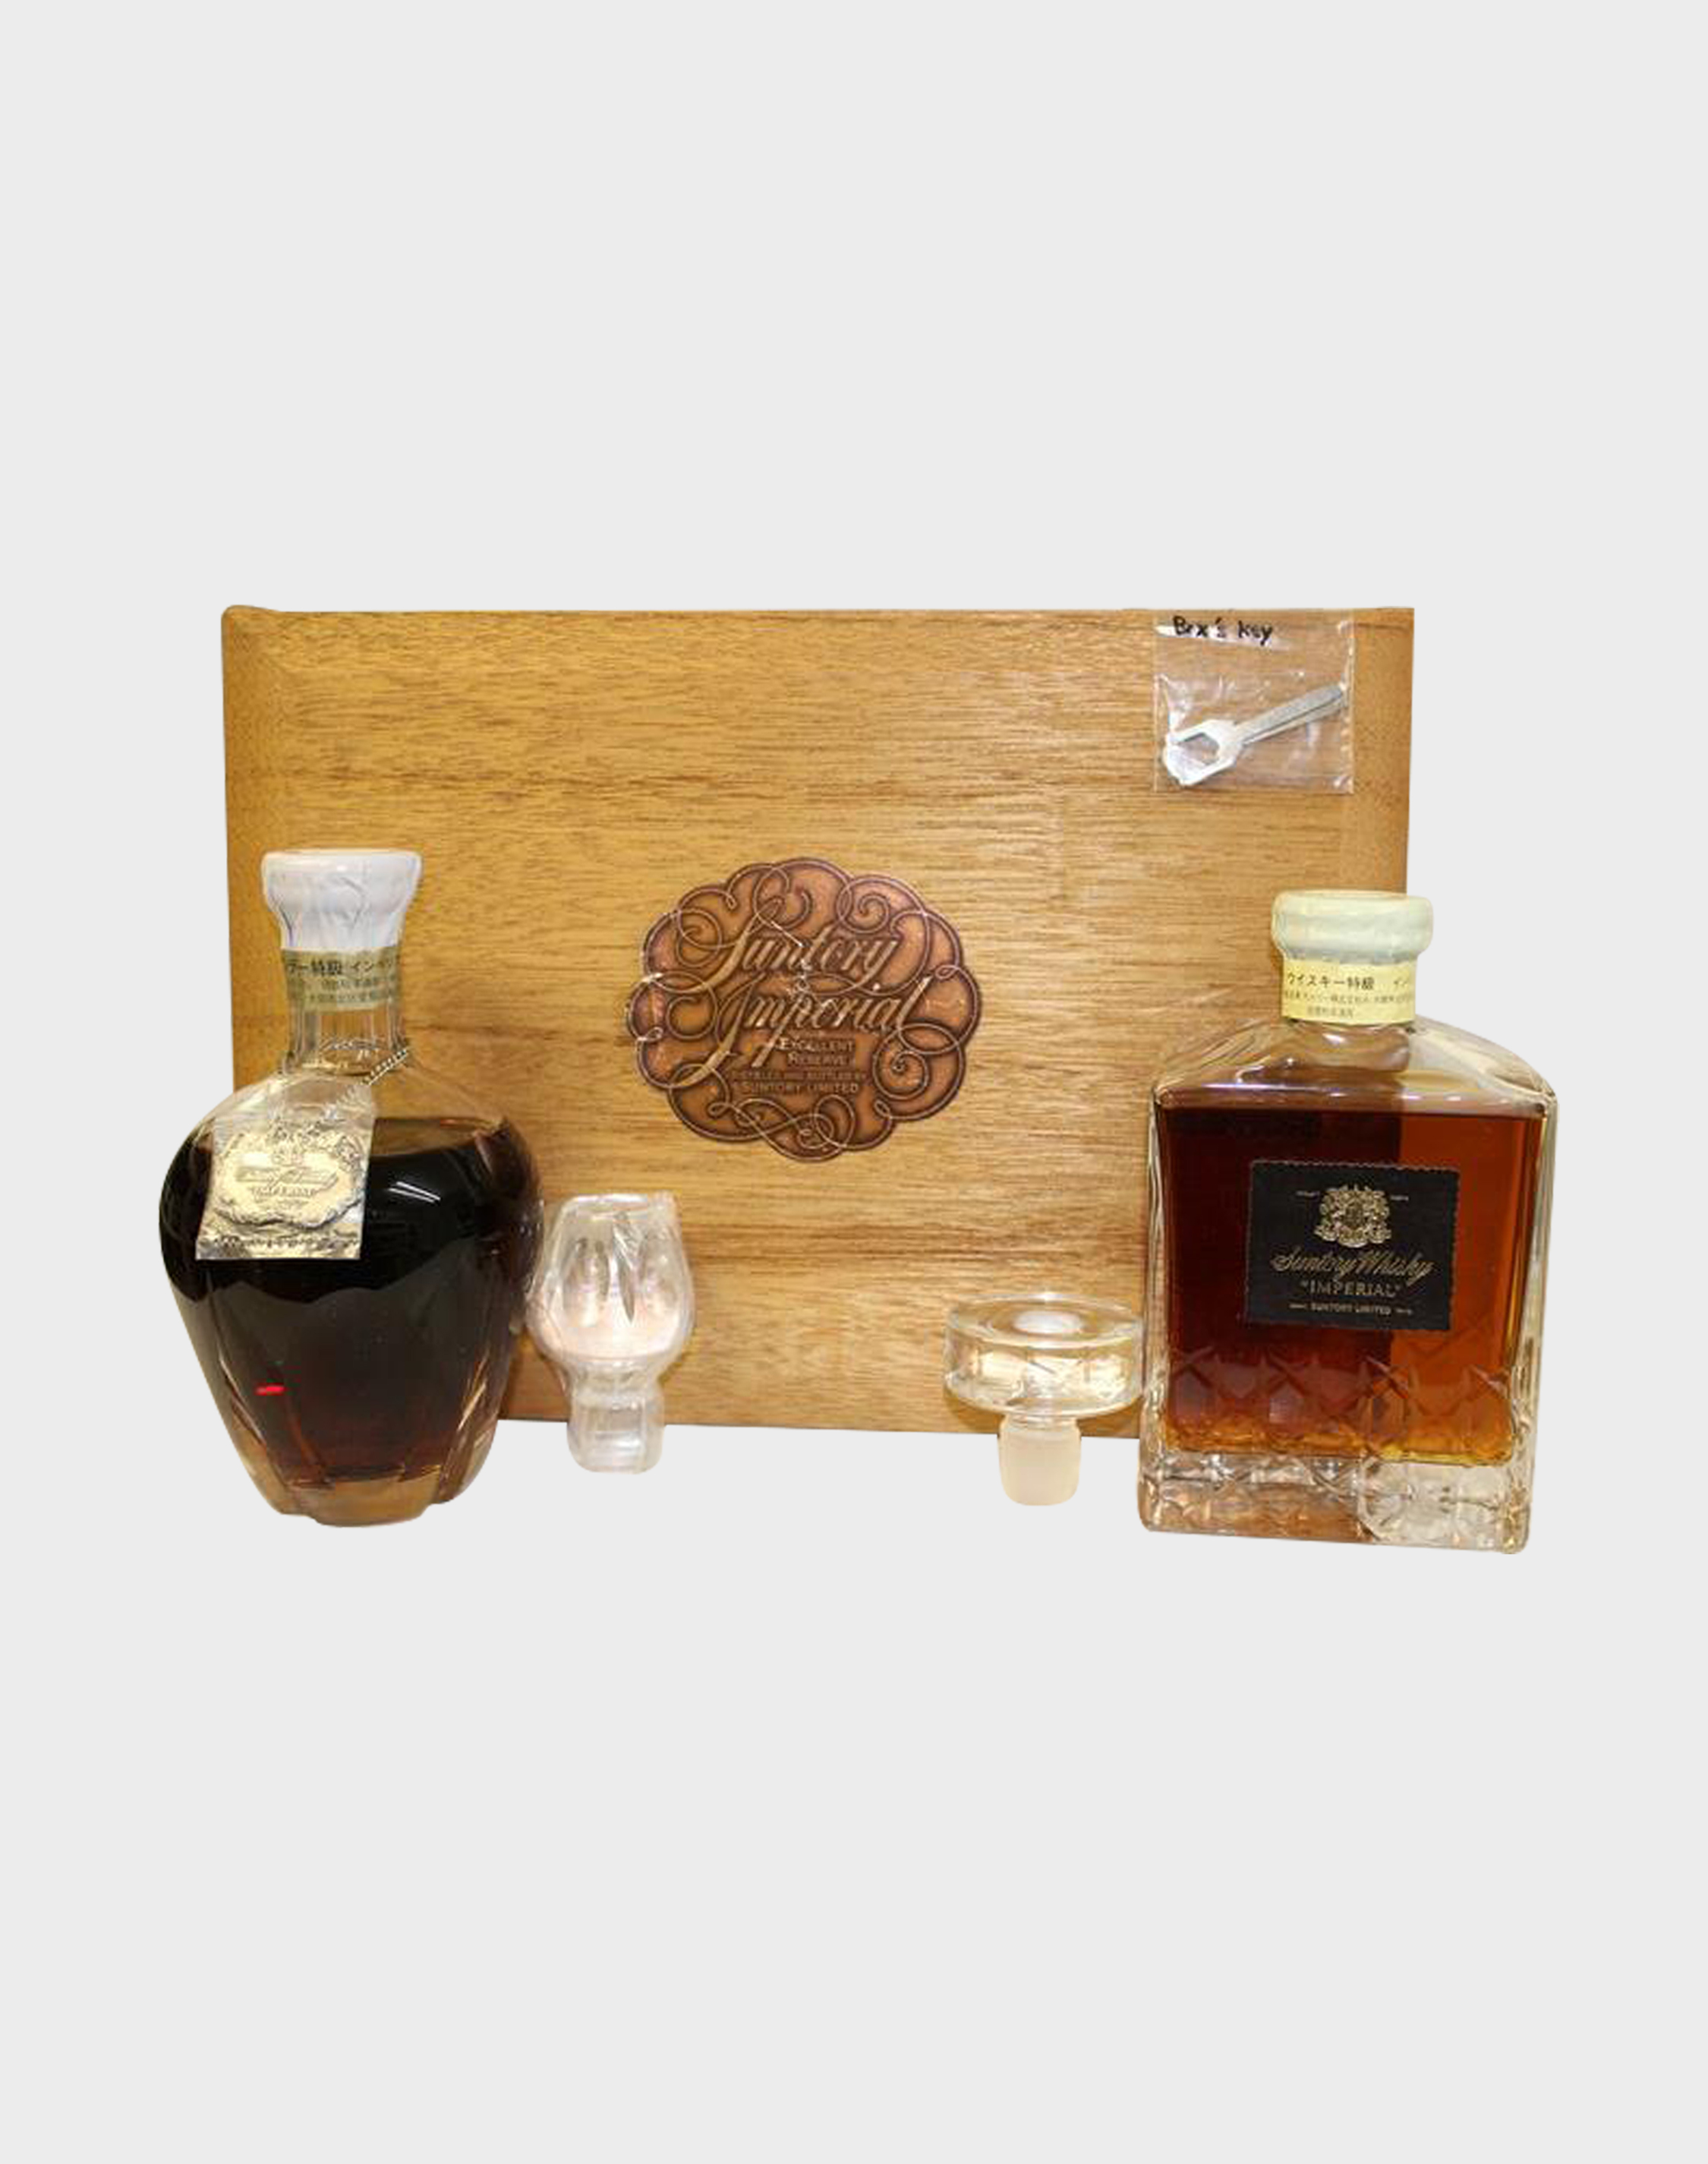 Suntory Whisky & Brandy “Imperial” with Crystal Stopper - Woodenbox